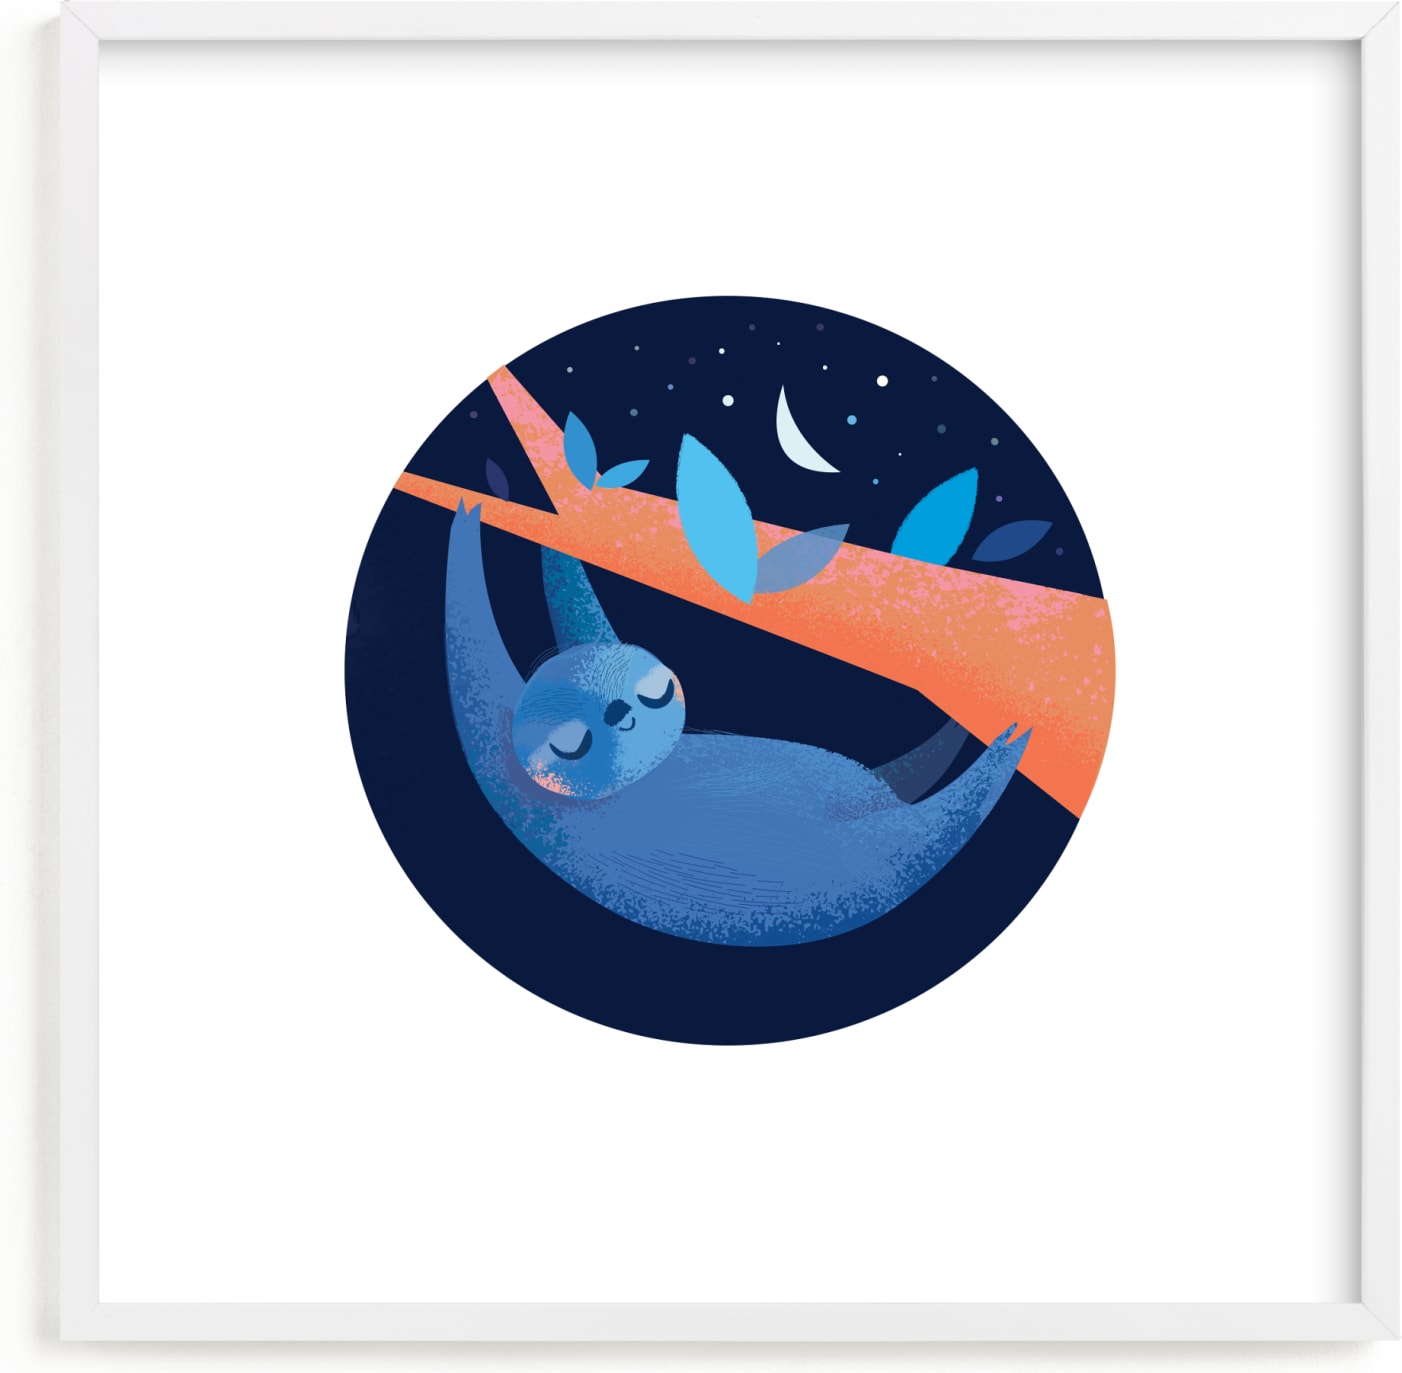 This is a blue kids wall art by Lori Wemple called Sleepy Sloth.